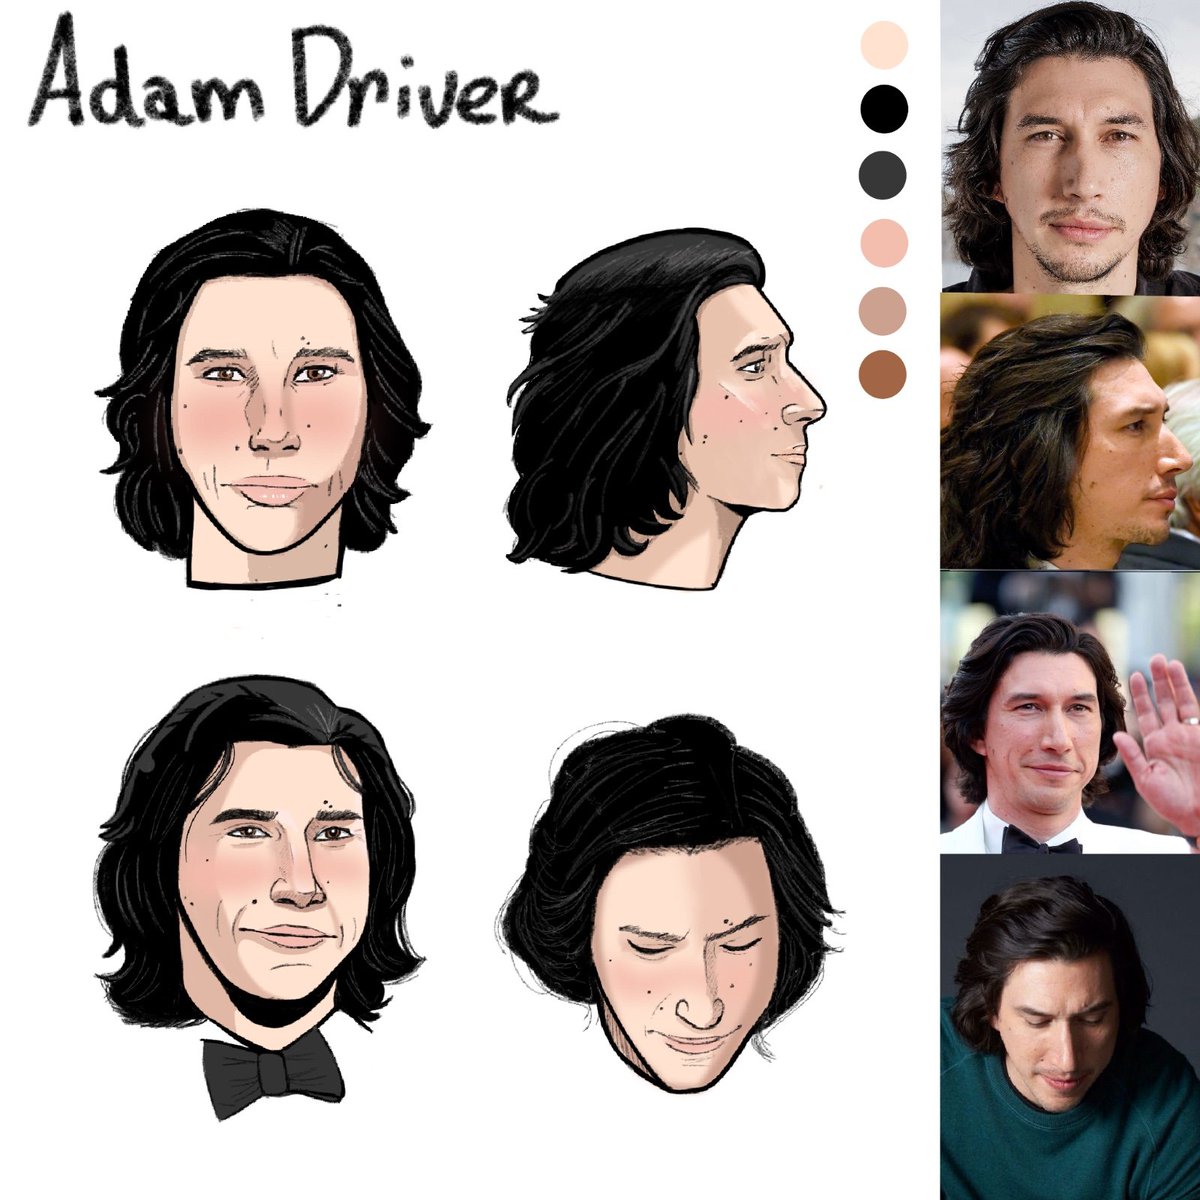 Some sketches of Adam Driver's head from four different angles that I drew 😁 #adamdriver #reyloart